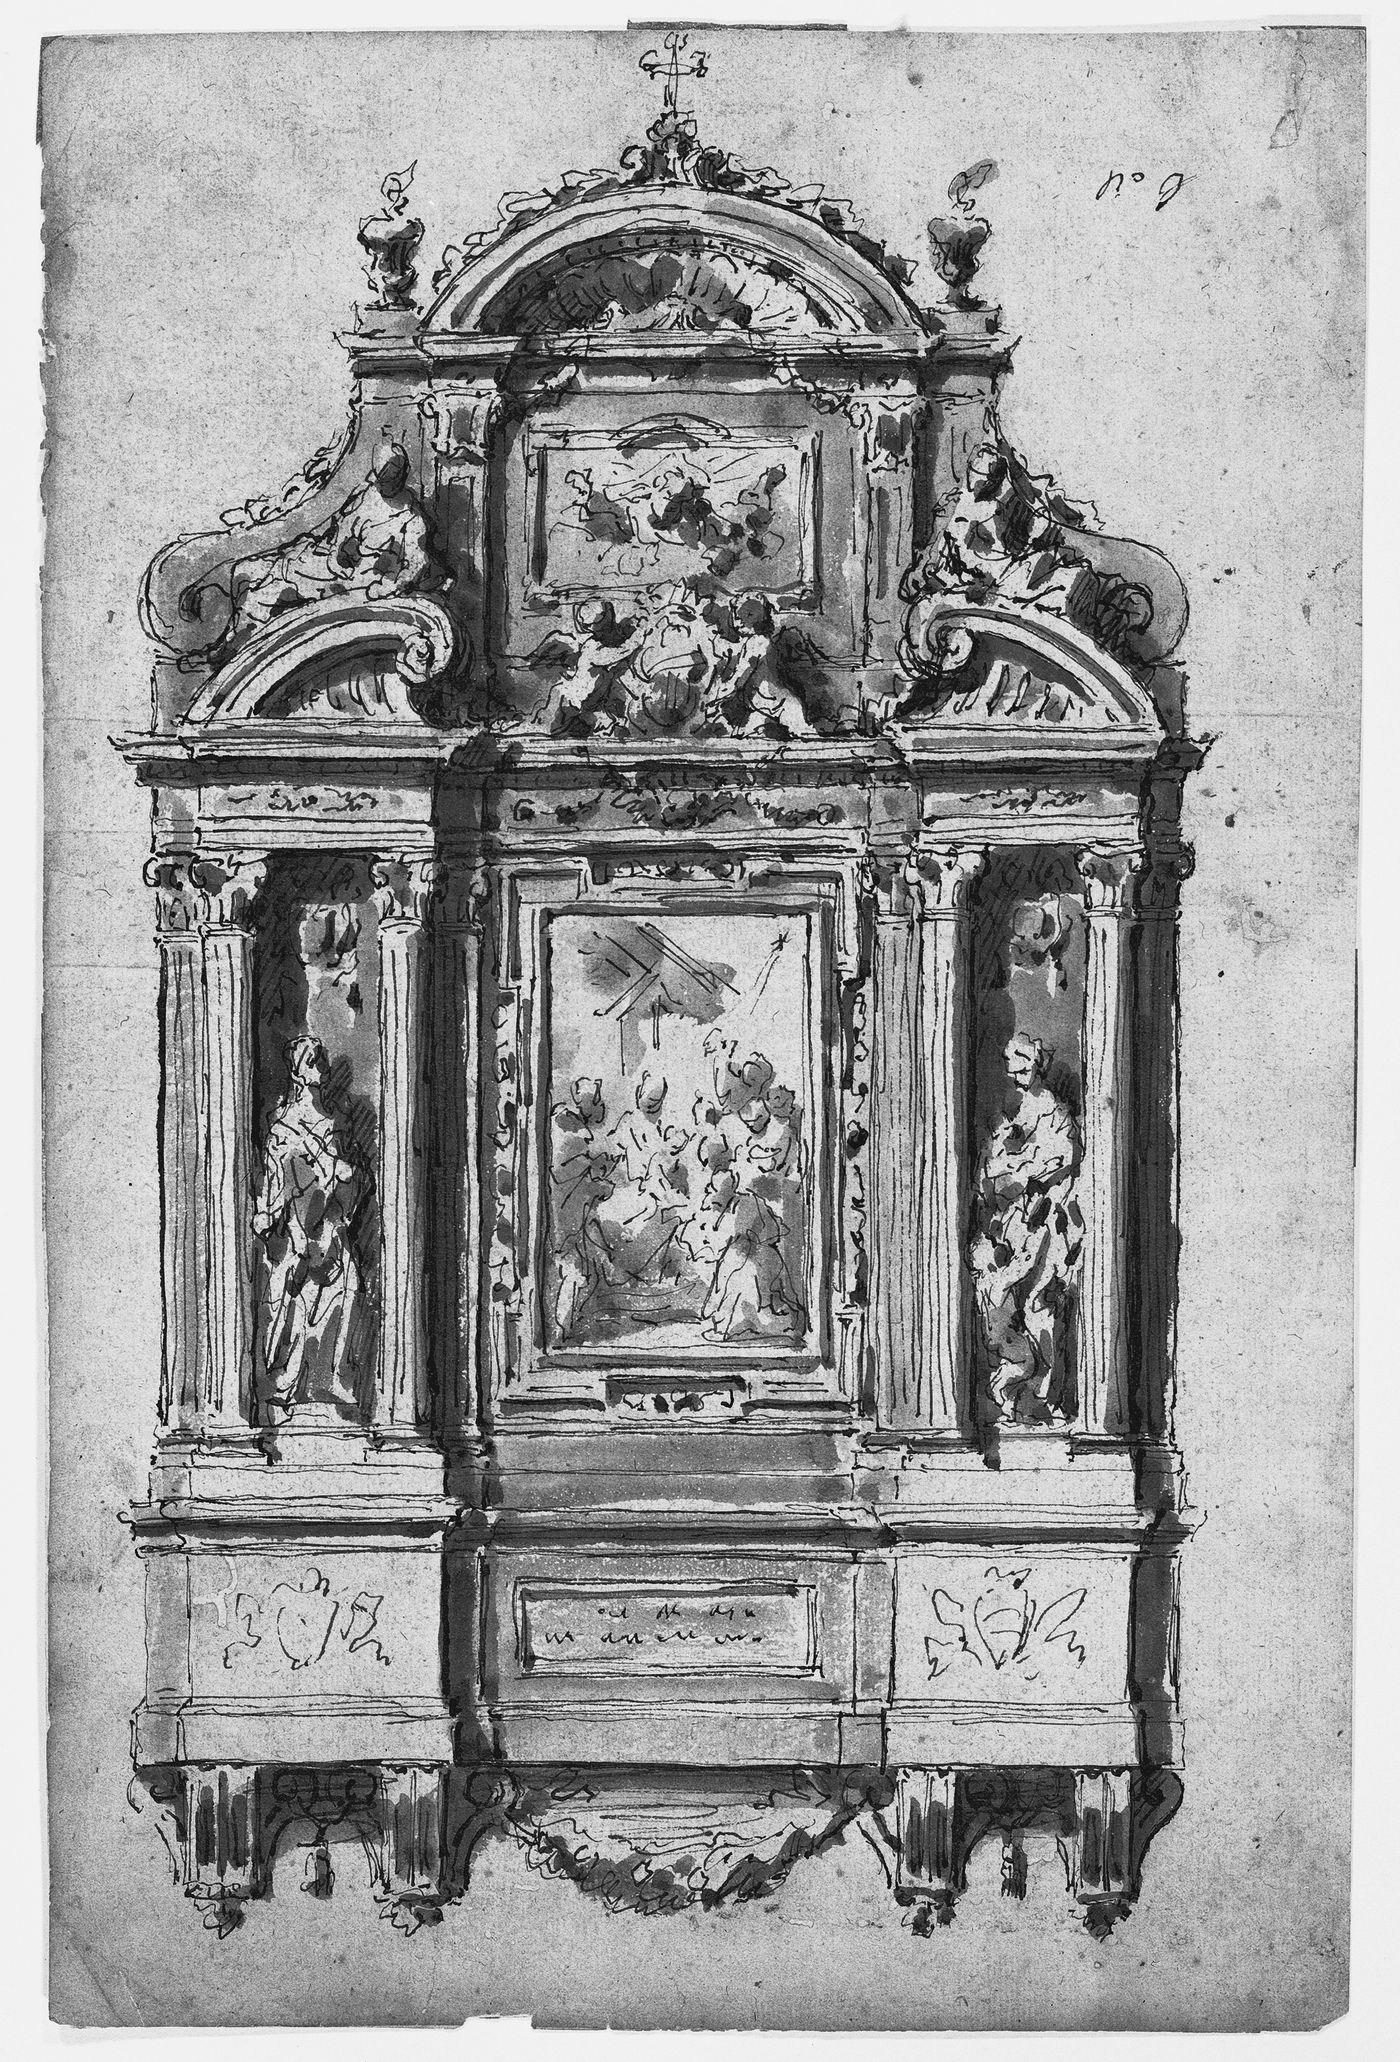 Sketch of an altarpiece with sculpted figures of Charity and Faith flanking an image of the Adoration of the Shepherds, a panel above with a representation of God the Father, and two putti holding a coat of arms.